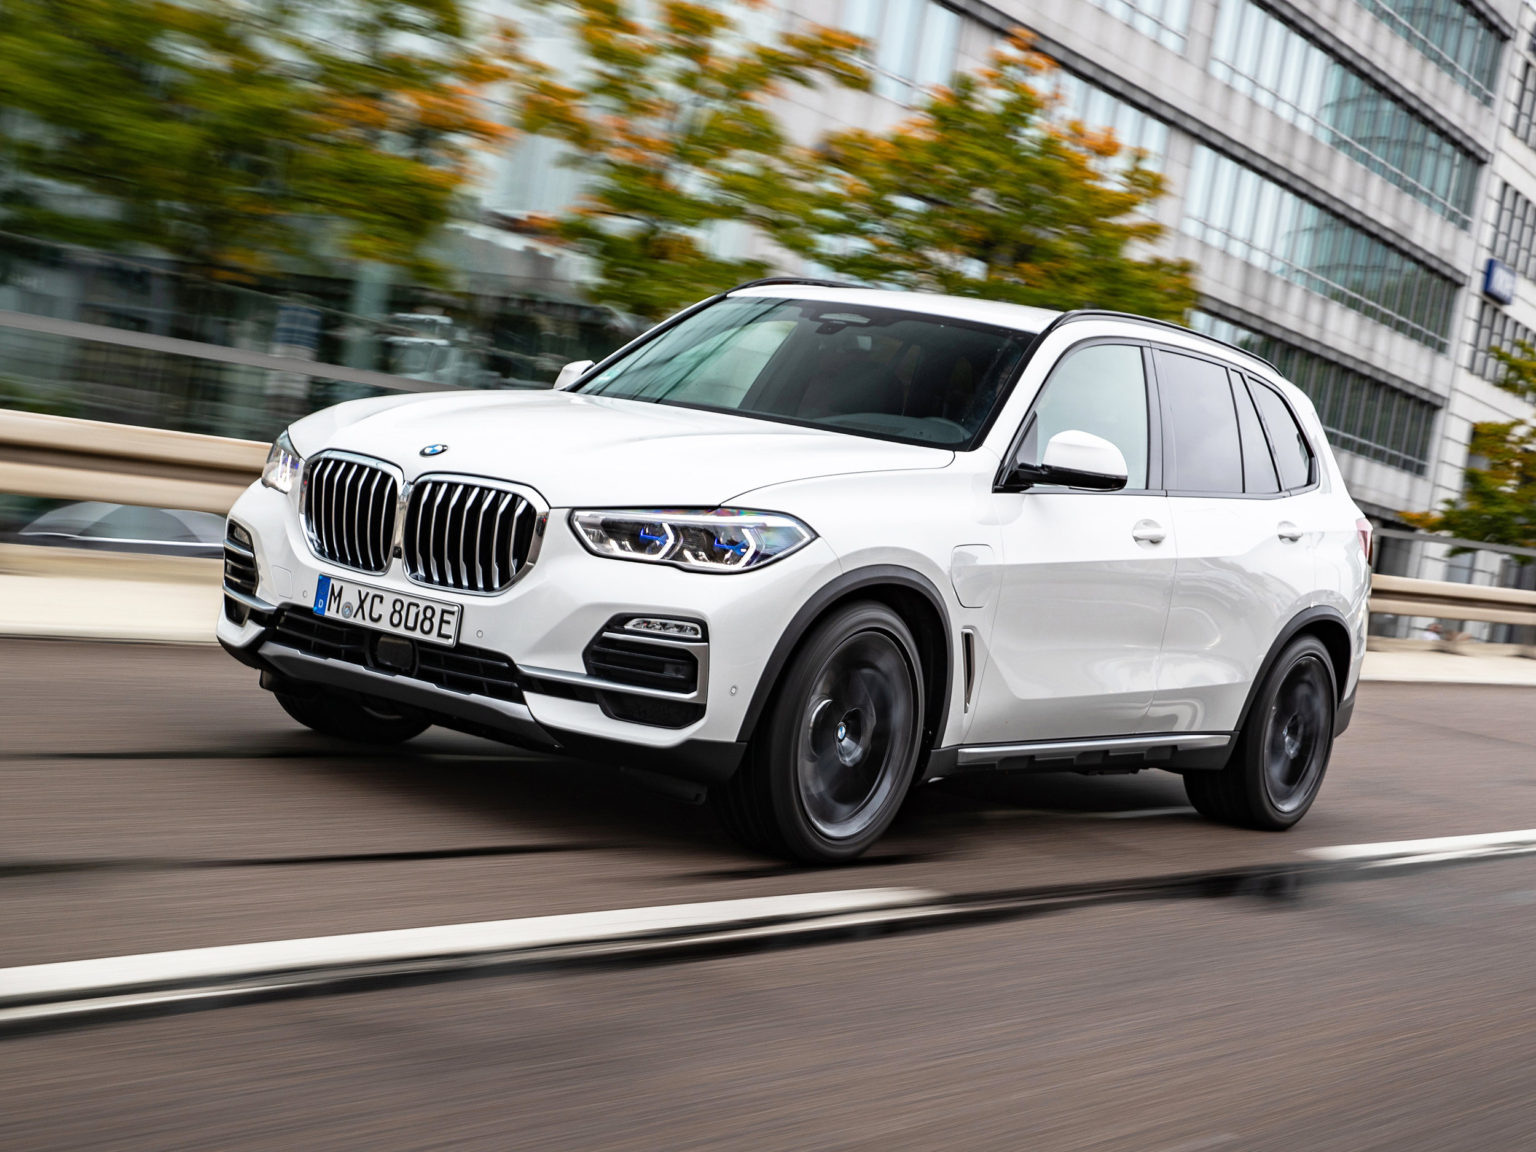 The U.S.-made next-gen 2021 BMW X5 plug-in hybrid SUV debuted earlier this year with big horsepower bump.